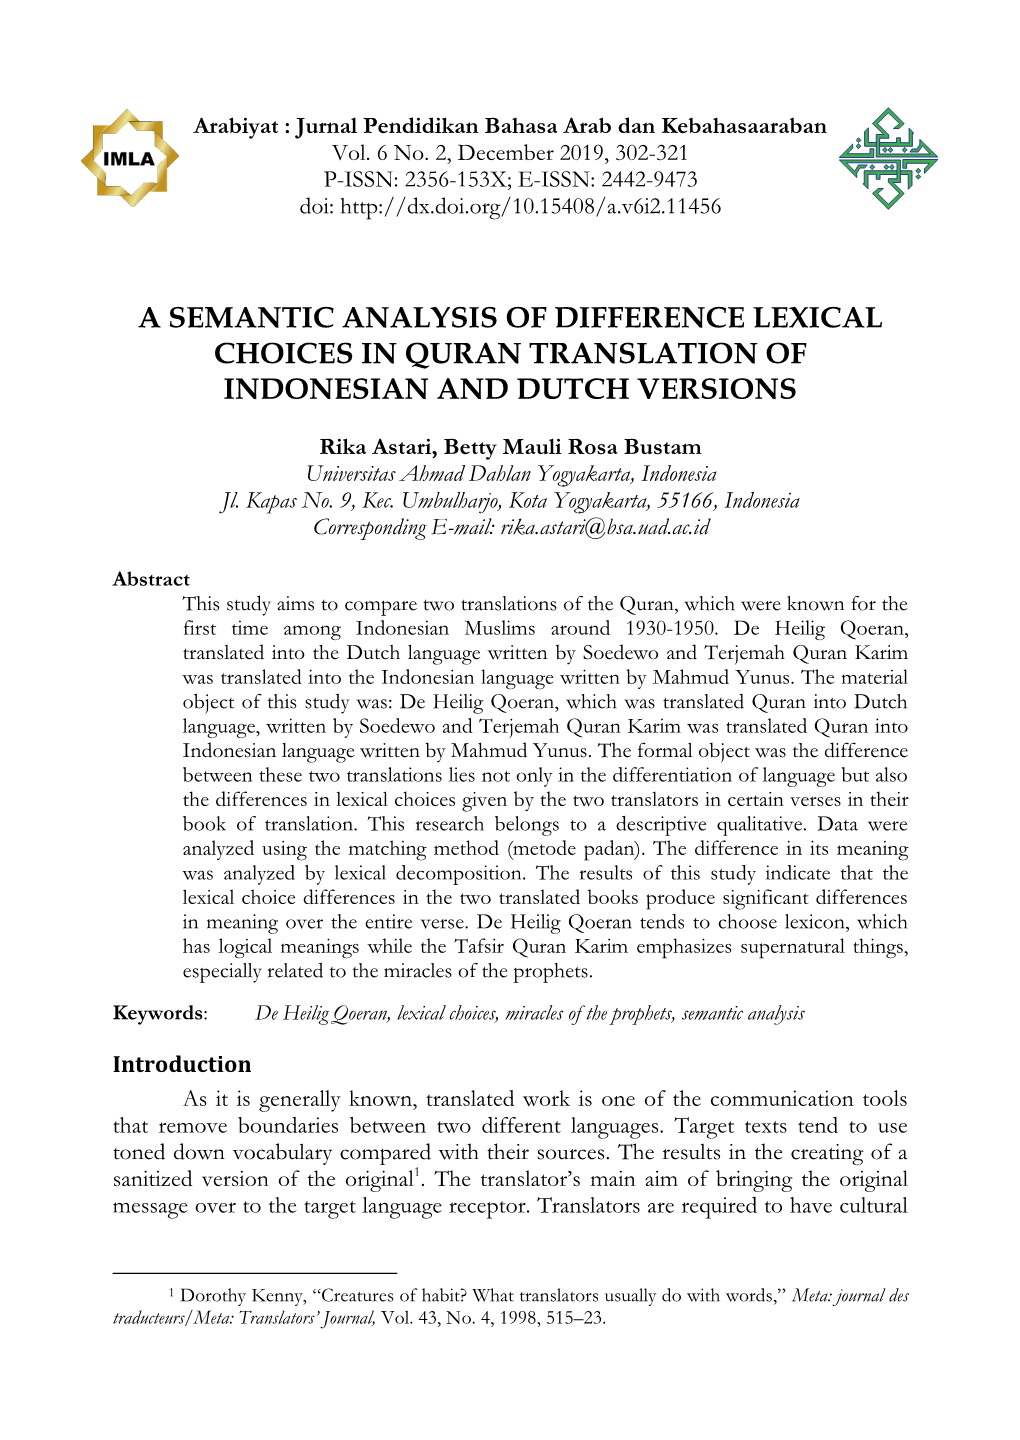 A Semantic Analysis of Difference Lexical Choices in Quran Translation of Indonesian and Dutch Versions